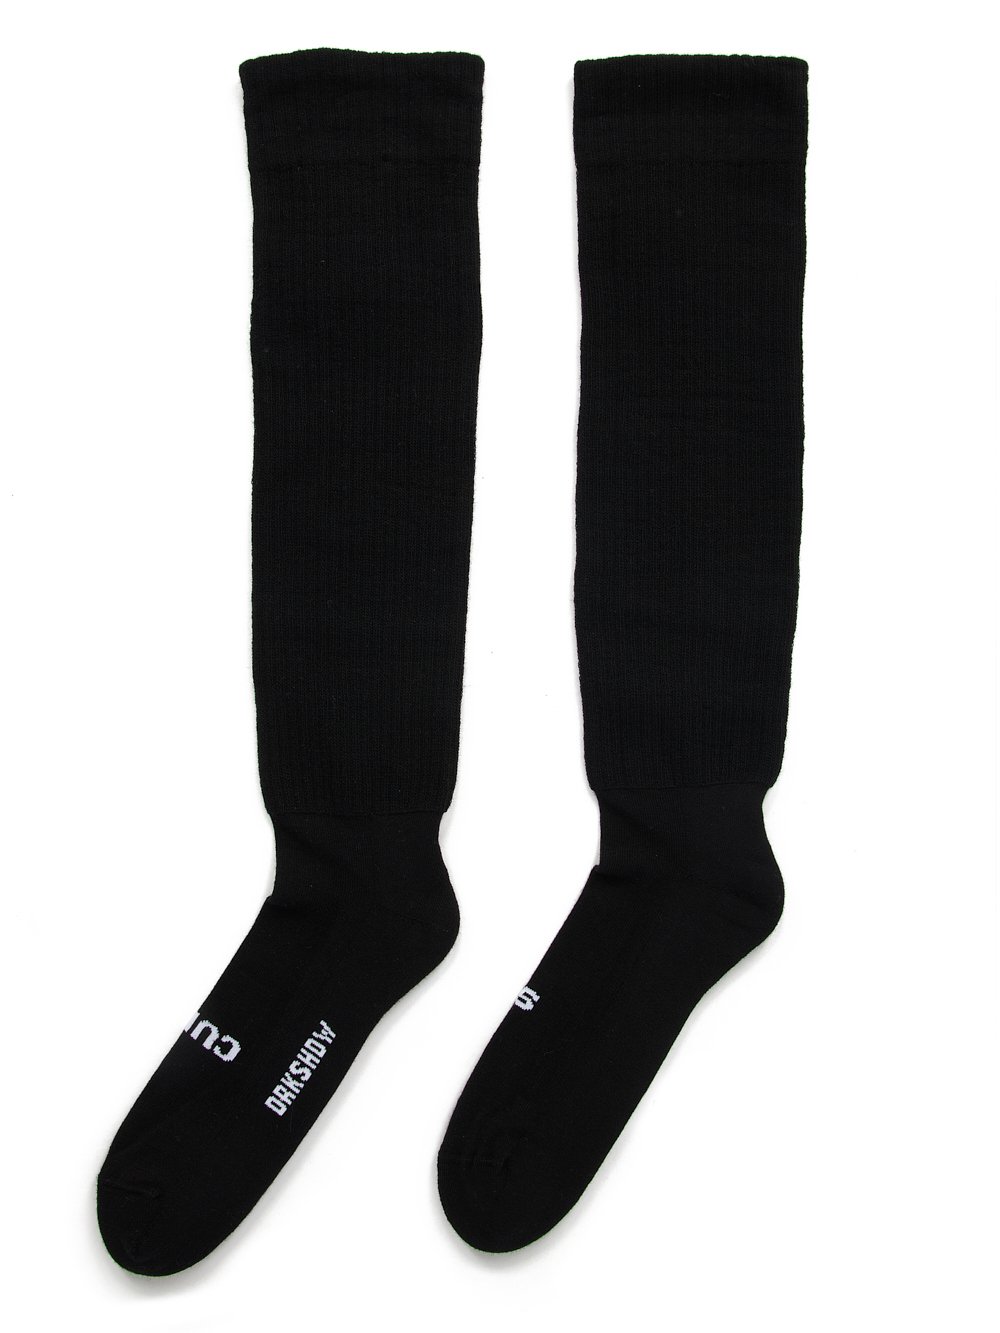 RICK OWENS FW23 LUXOR HIGH SOCKS SO CUNT IN BLACK AND MLK COTTON KNIT